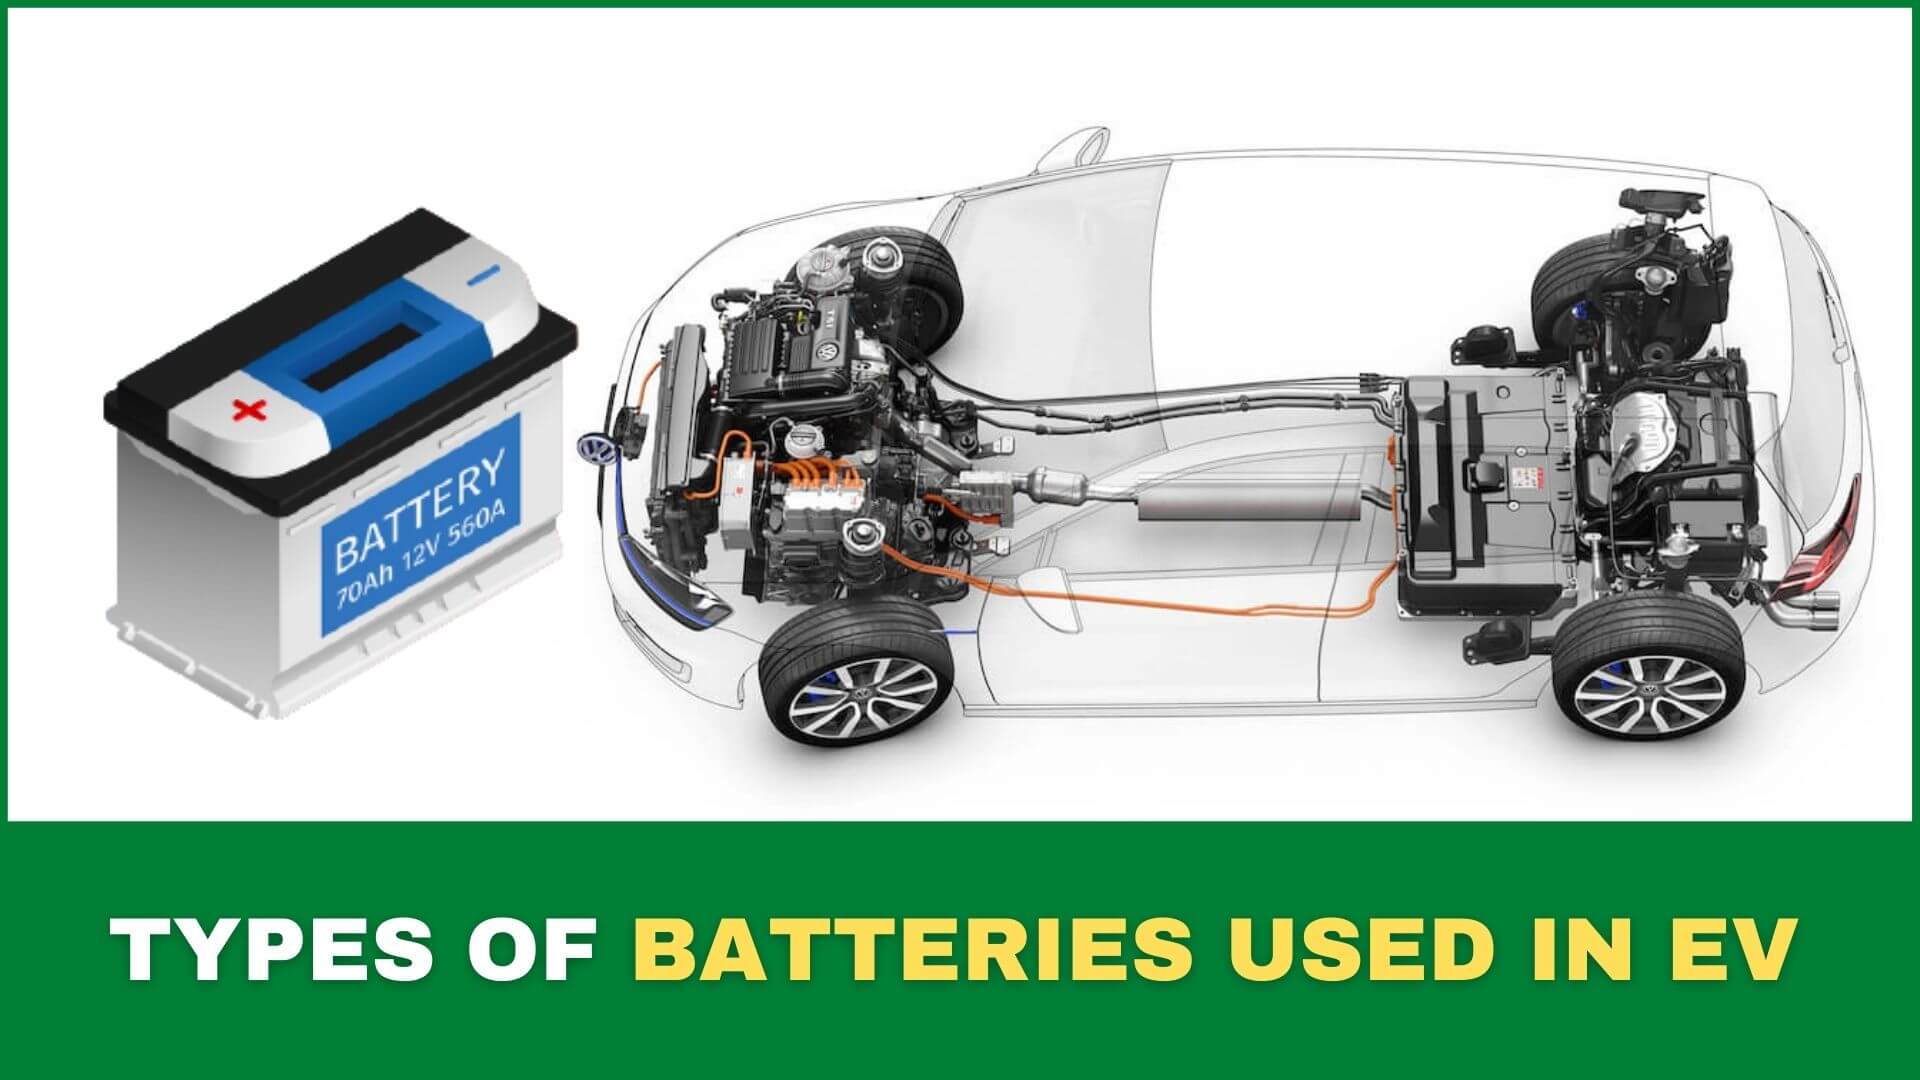 https://e-vehicleinfo.com/types-of-batteries-used-in-electric-vehicles-in-india/